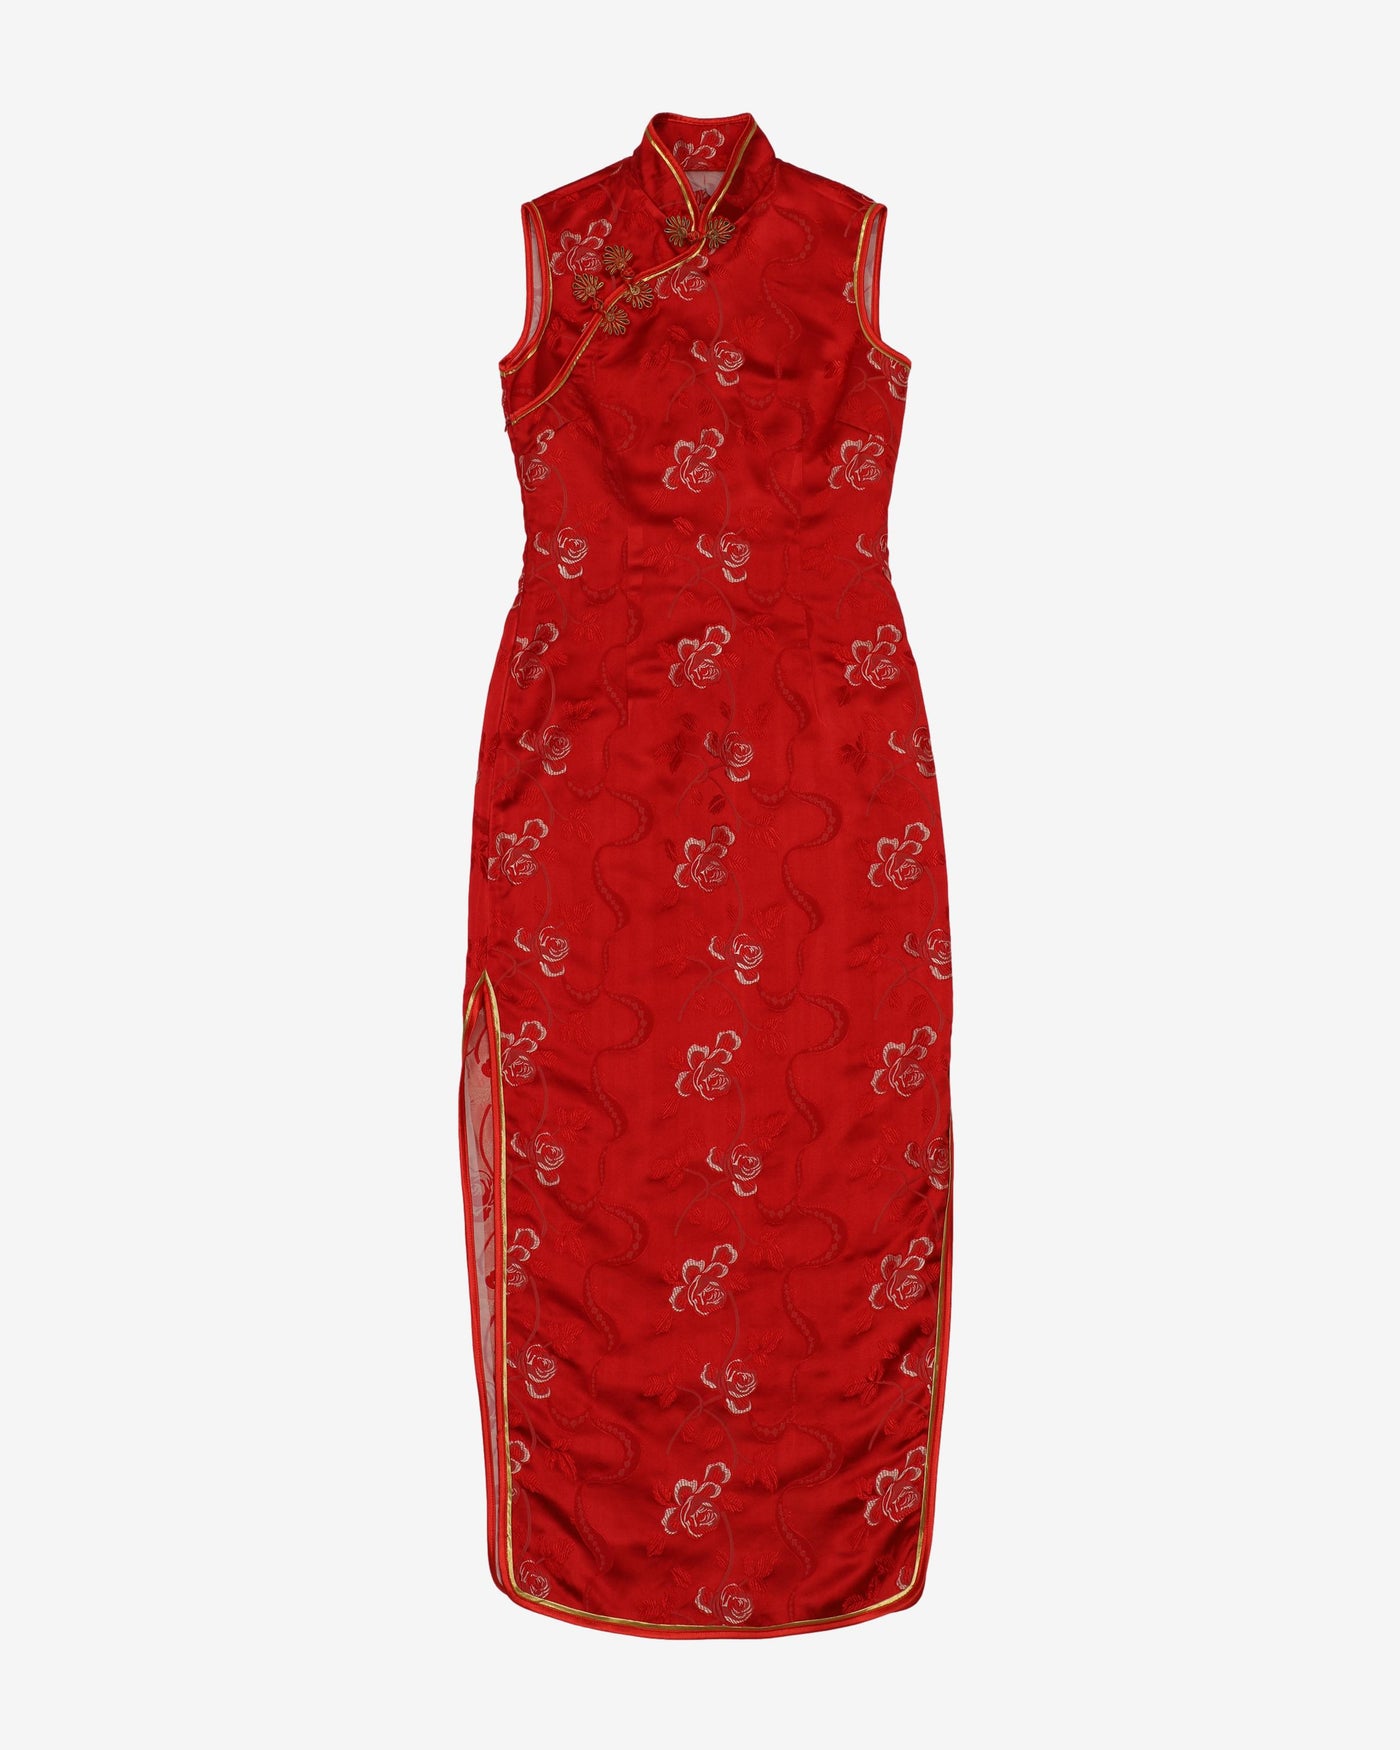 Red And Gold Floral Brocade Cheongsam Dress - XS